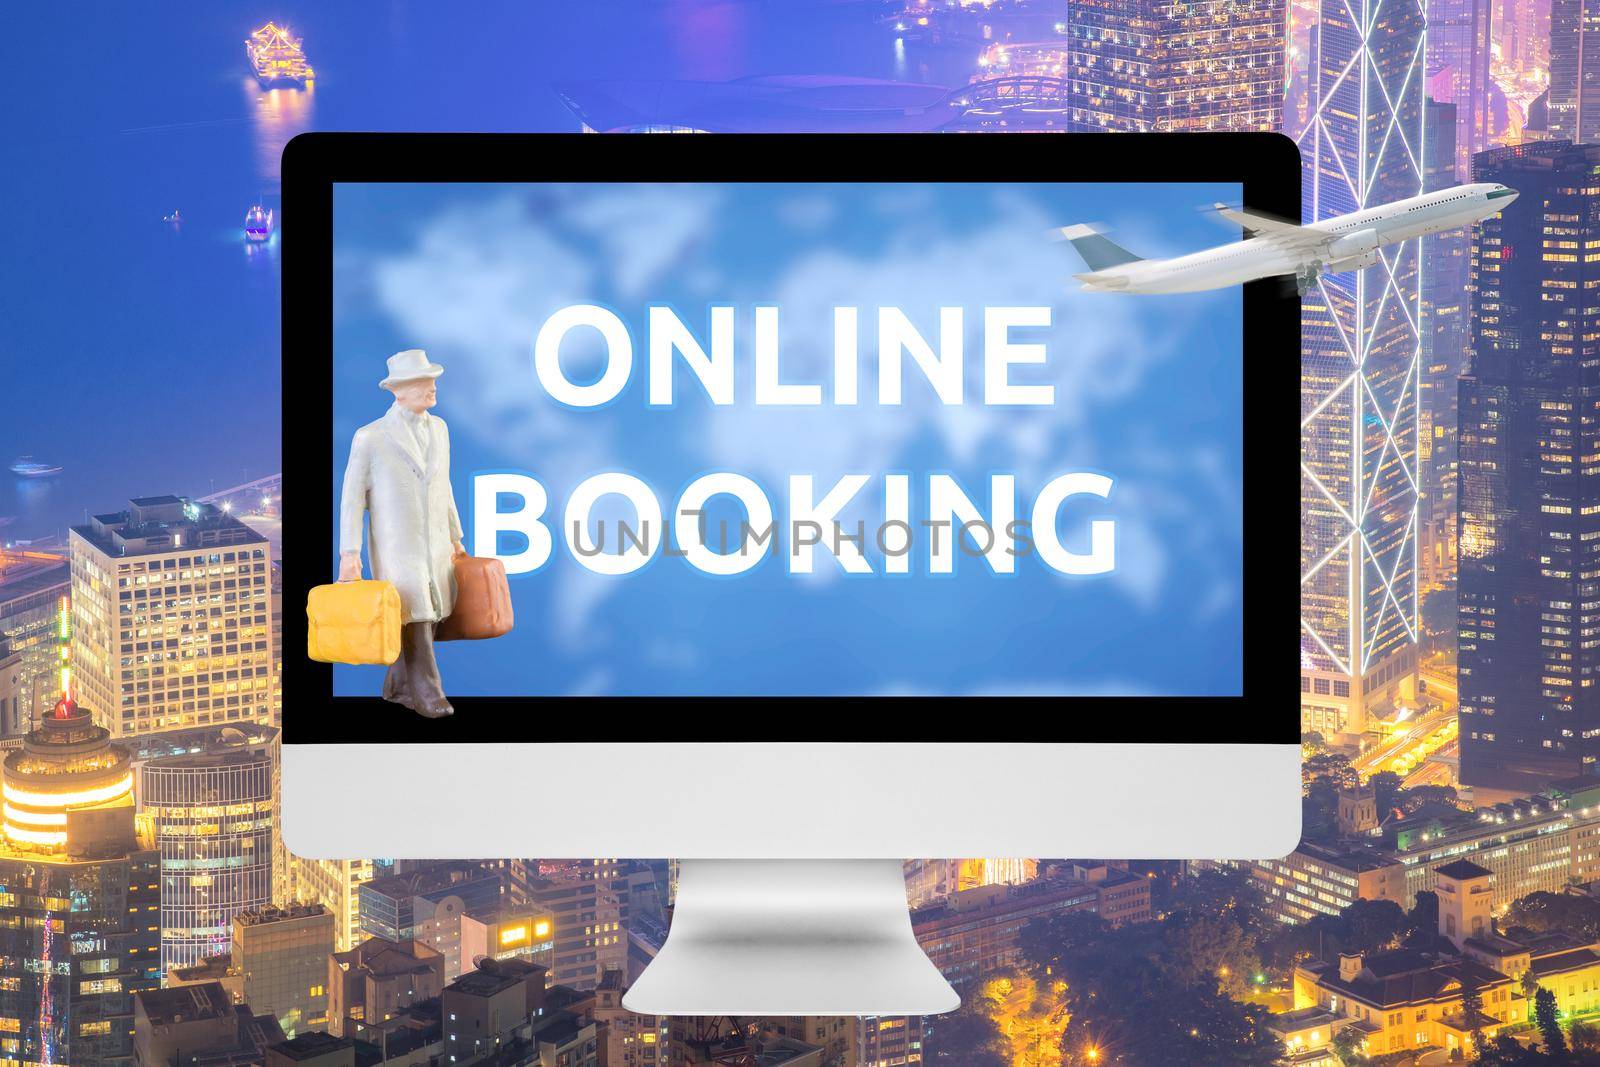 Laptop showing online booking on screen with Commercial airplane flying over big city in background. Elegant Design with copy space for business tansportation and travel concept.